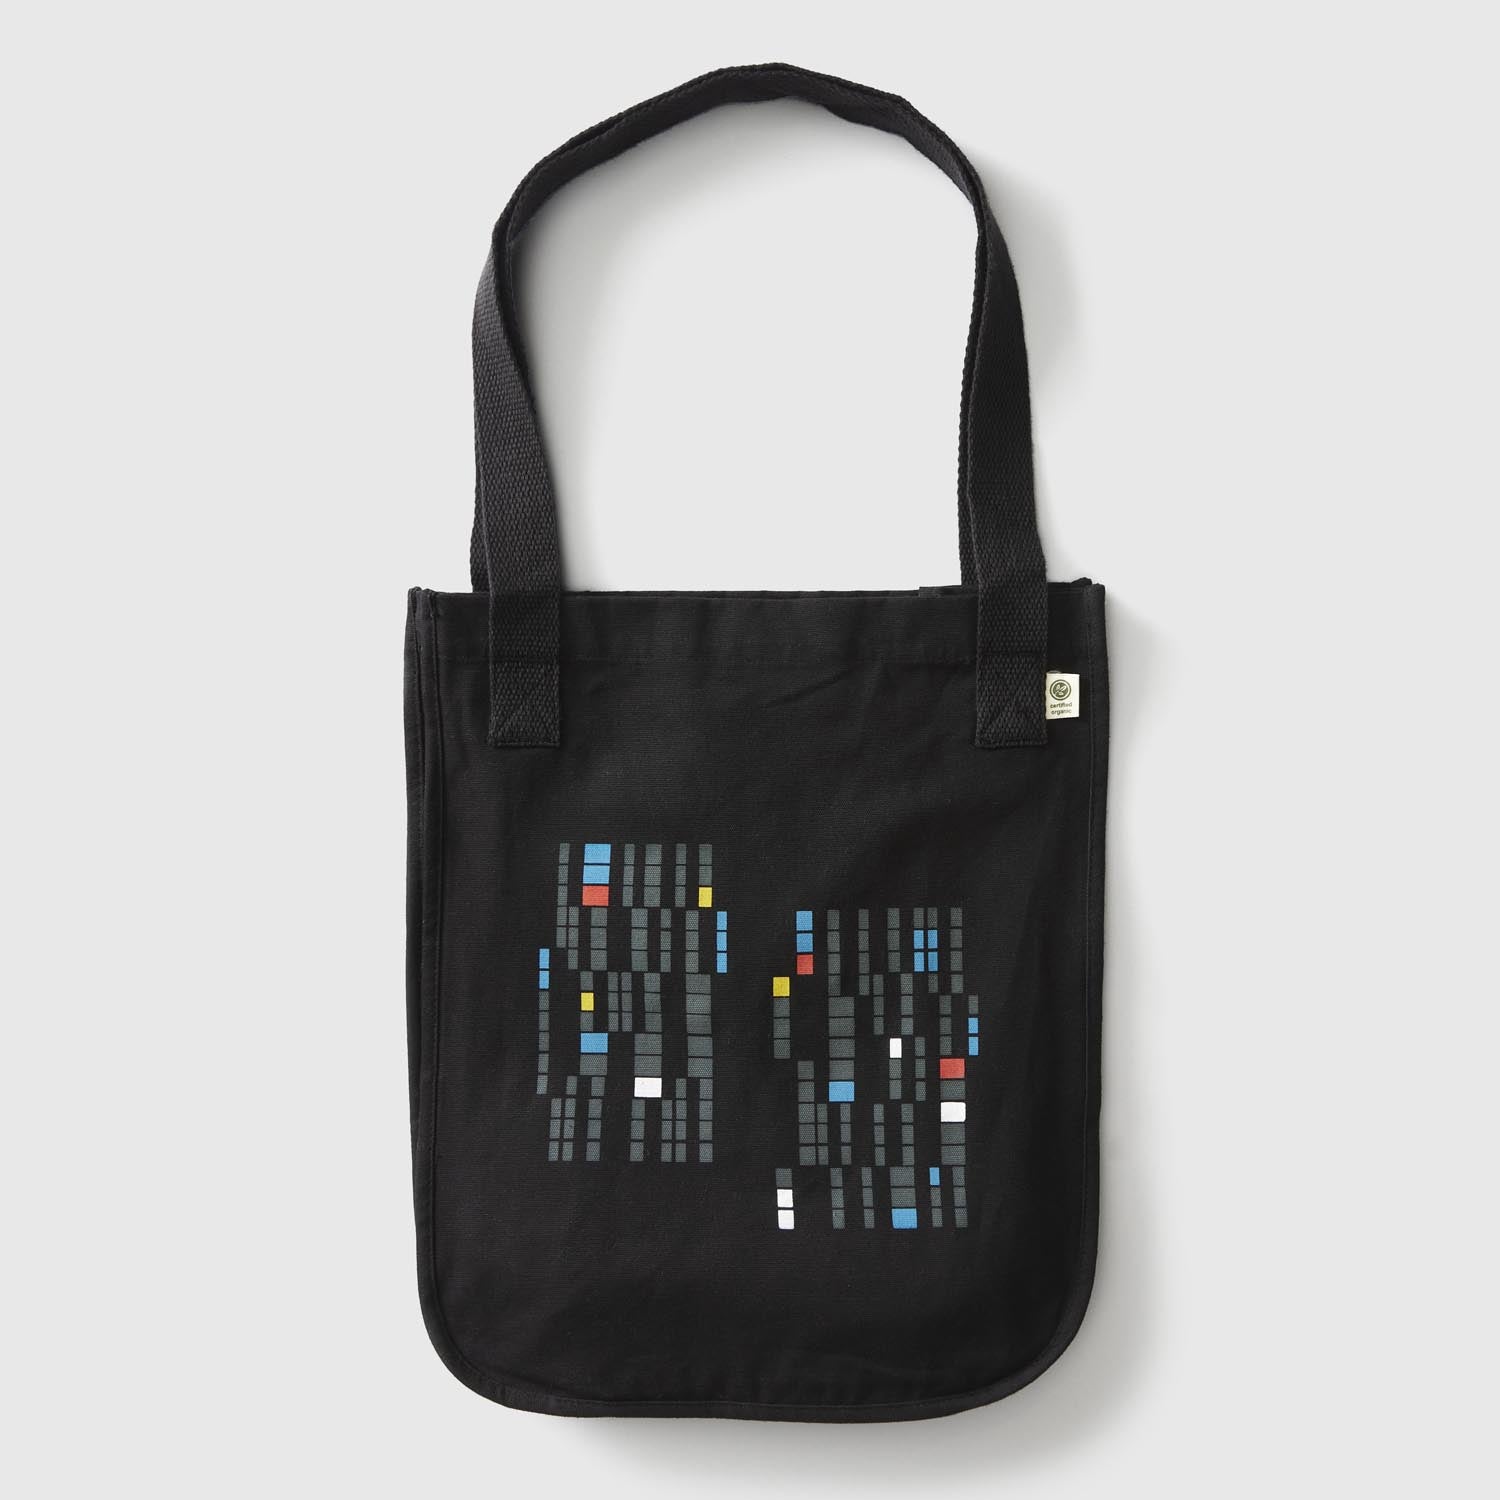 Black market tote with a design of rectangles in a variety of colors. minnesota clothing, minnesota apparel, minnesota accessories, minnesota gifts, minnesota goods, minnesota themed clothing, minnesota themed apparel, minnesota themed gifts, minnesota themed goods, minnesota totes, minnesota tote bags, minnesota tote, minnesota themed tote bags, minnesota themed totes, minnesota themed tote